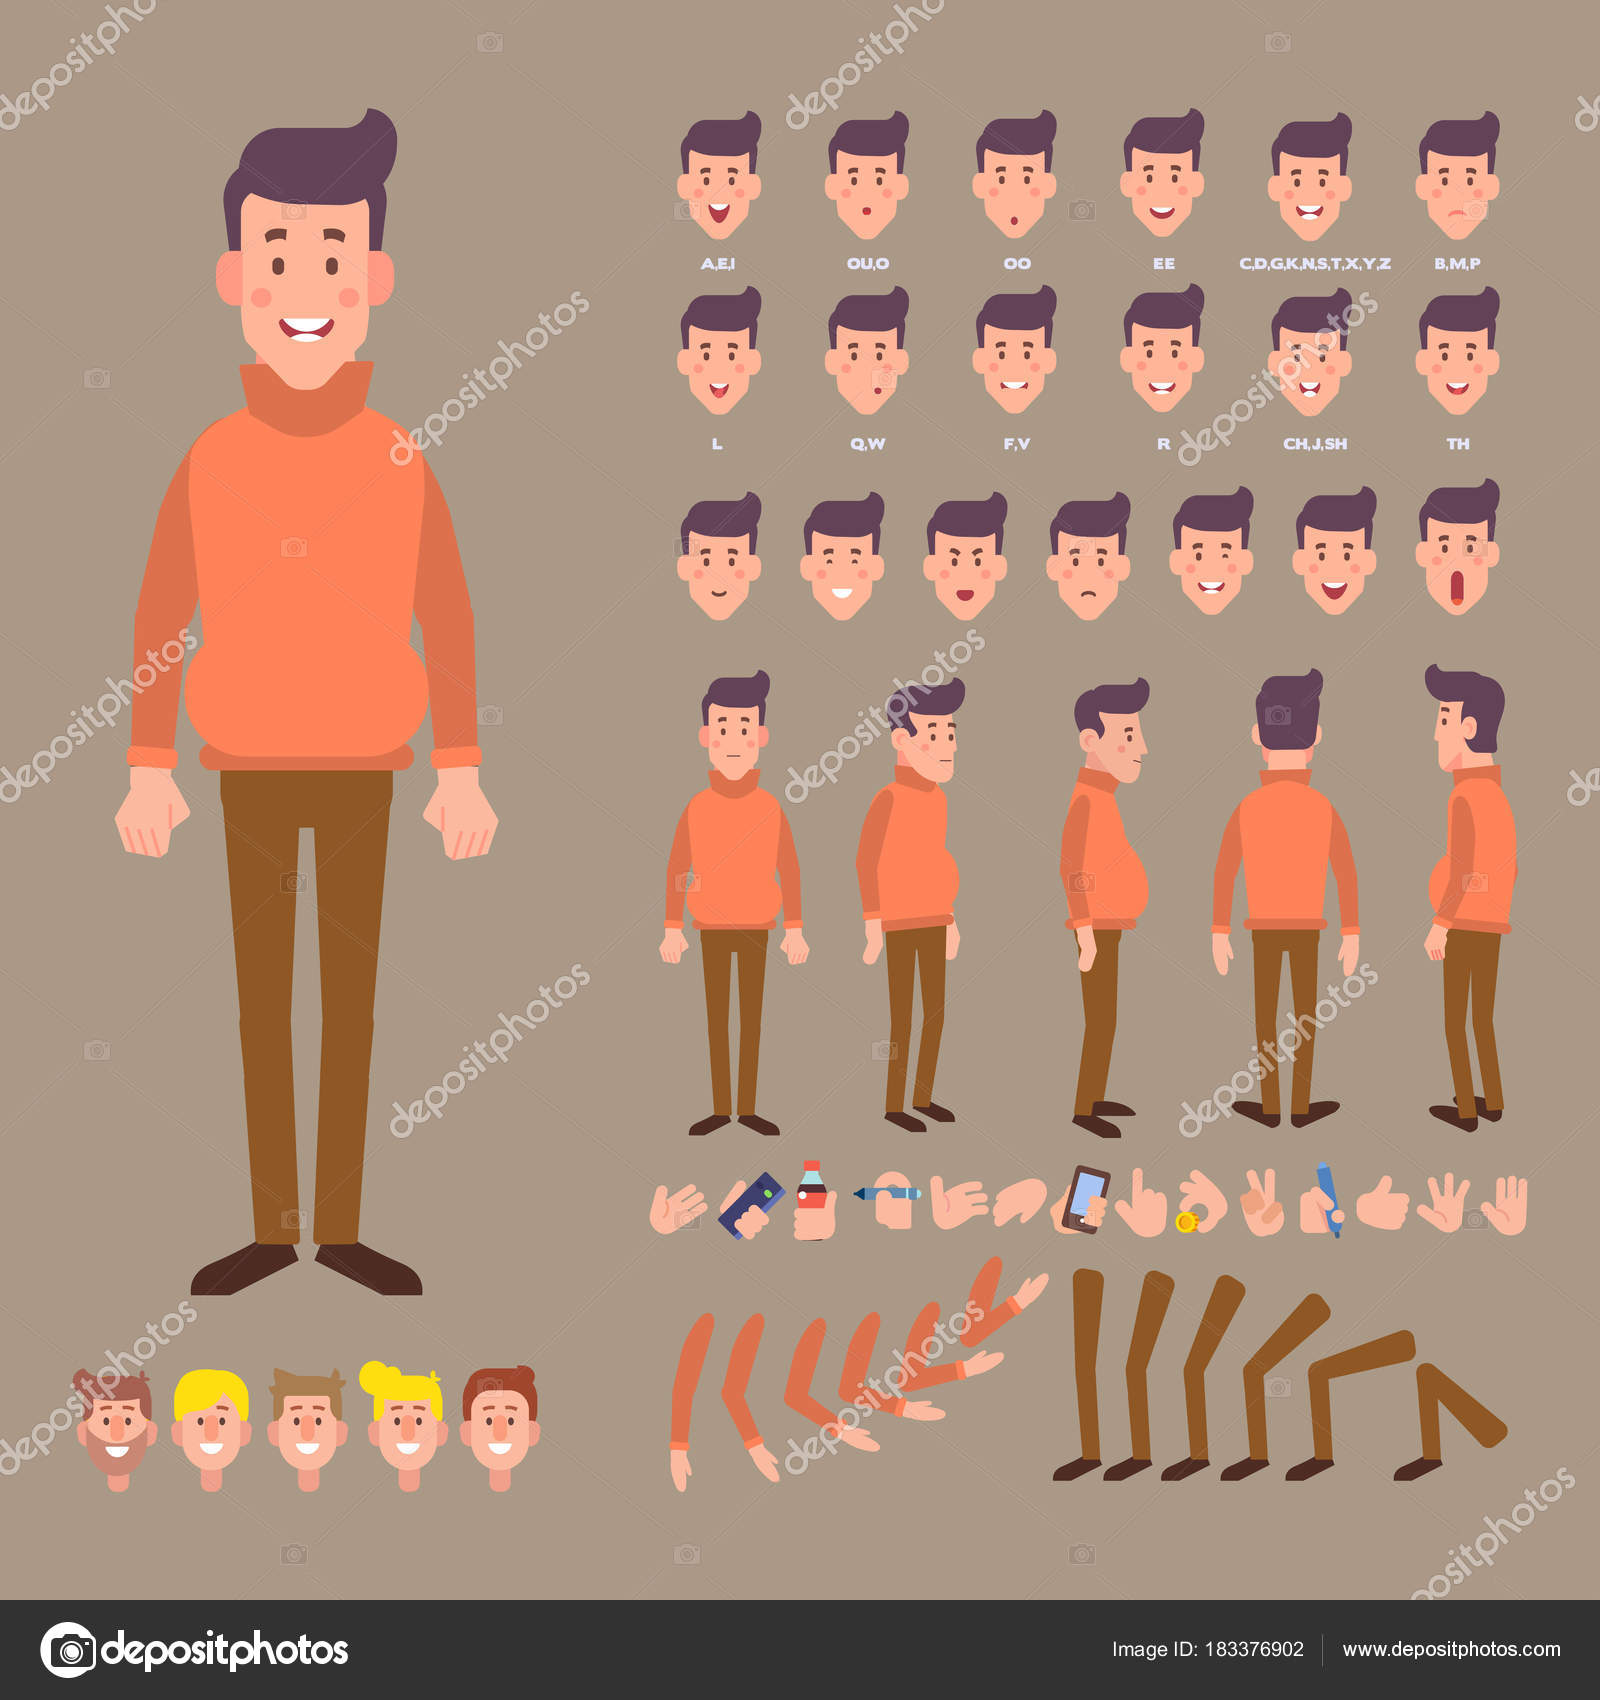 Side Pose Stock Illustrations, Cliparts and Royalty Free Side Pose Vectors